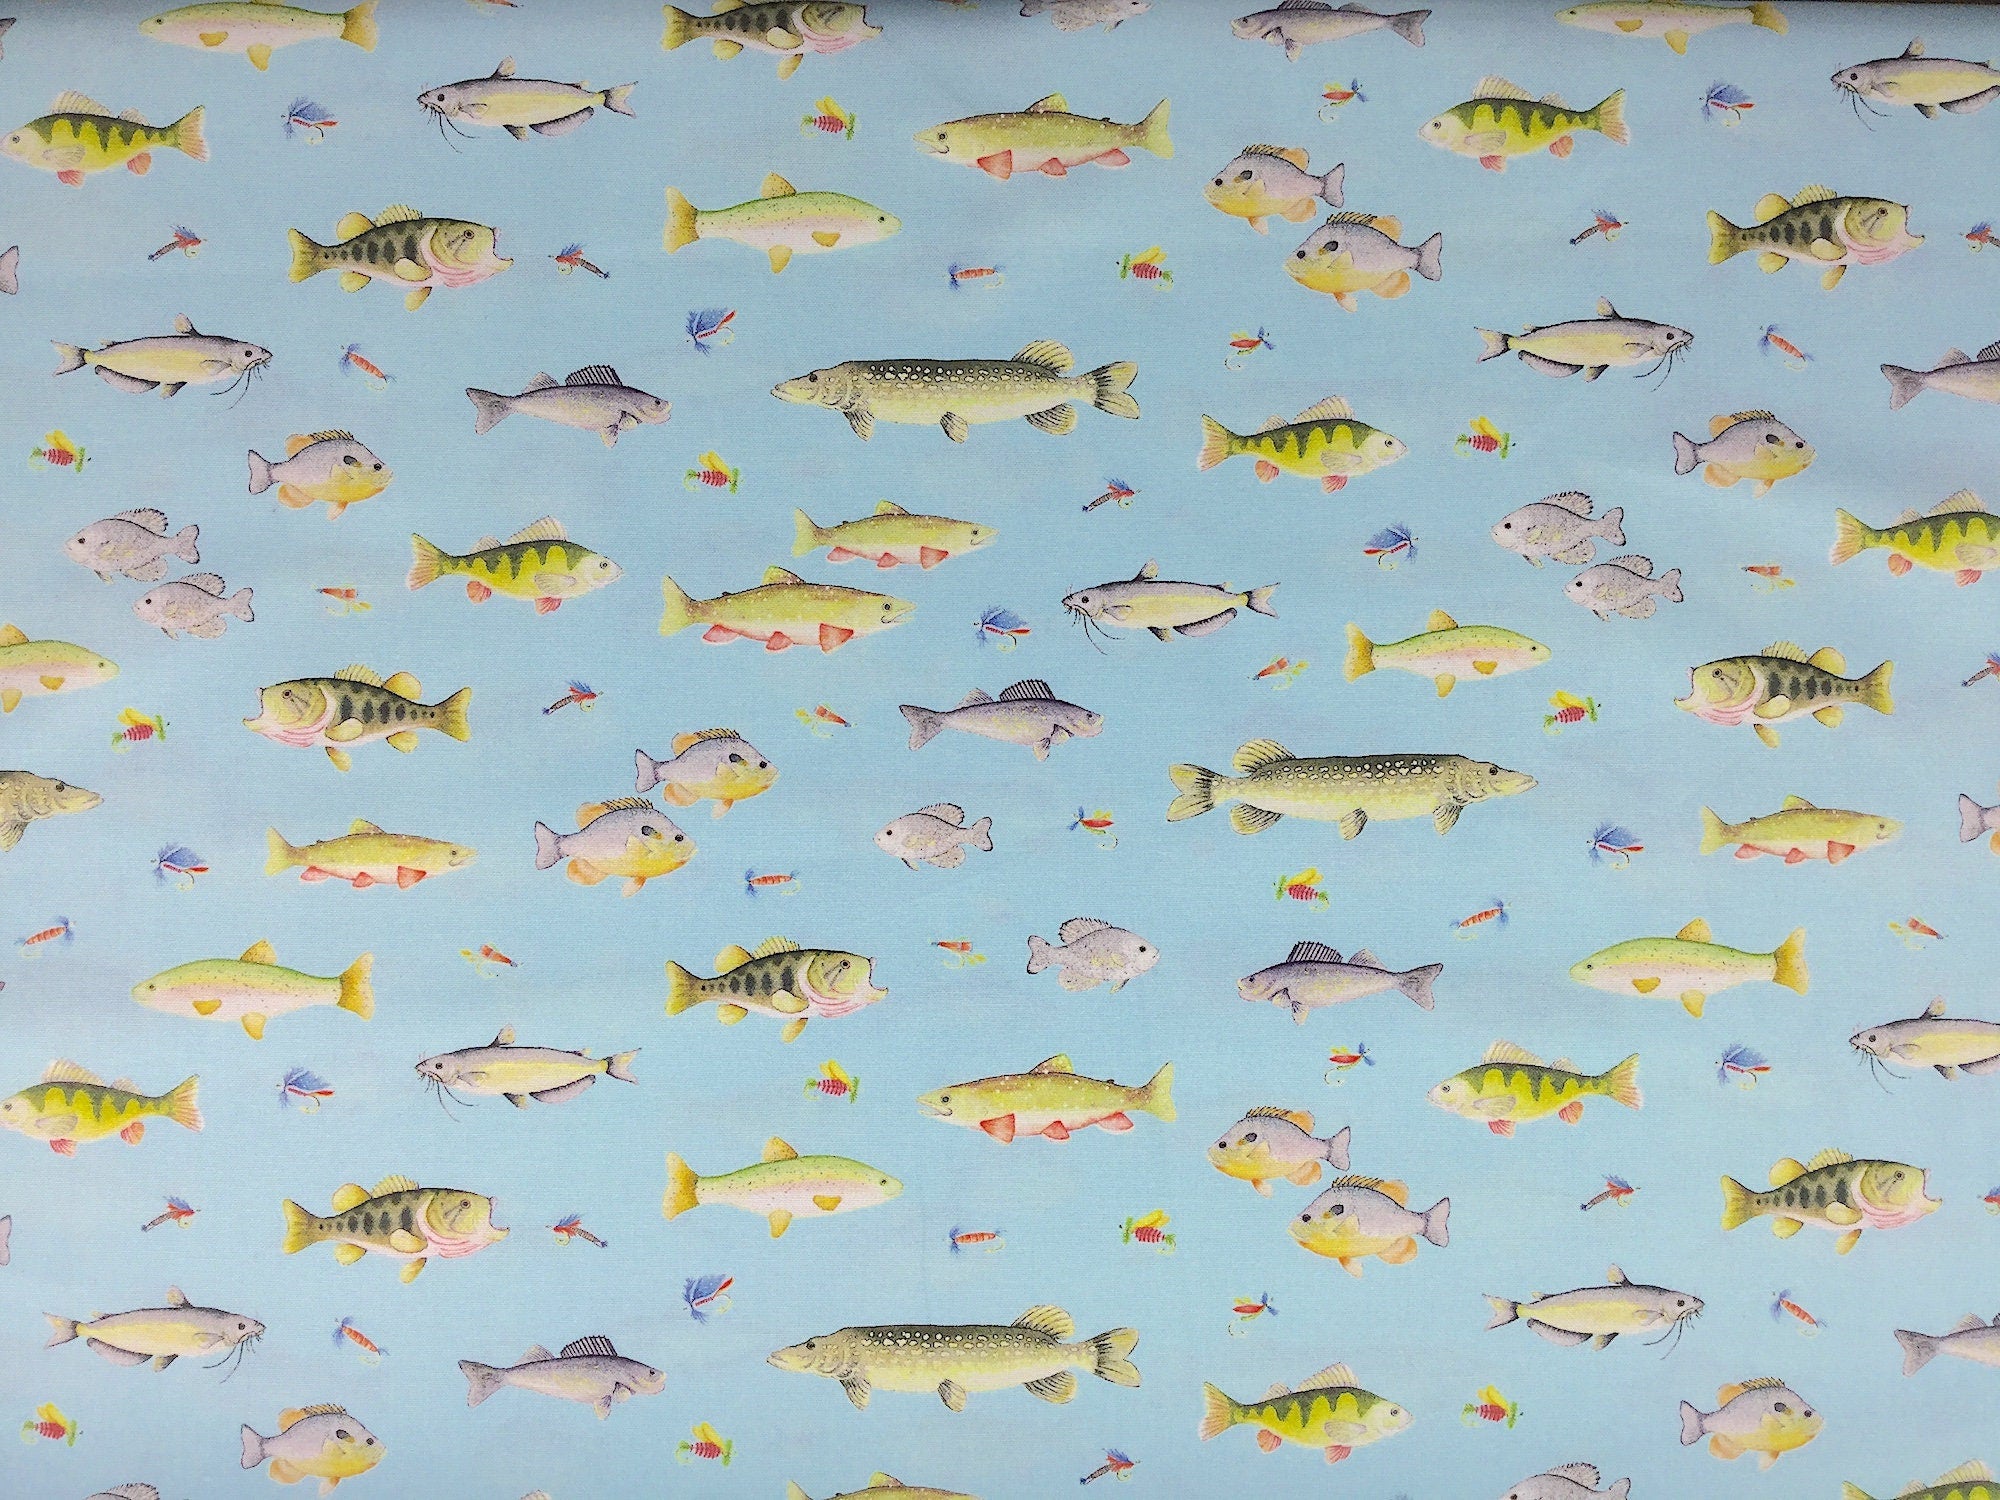 This fabric is covered with fish and fishing flies on a light blue background.